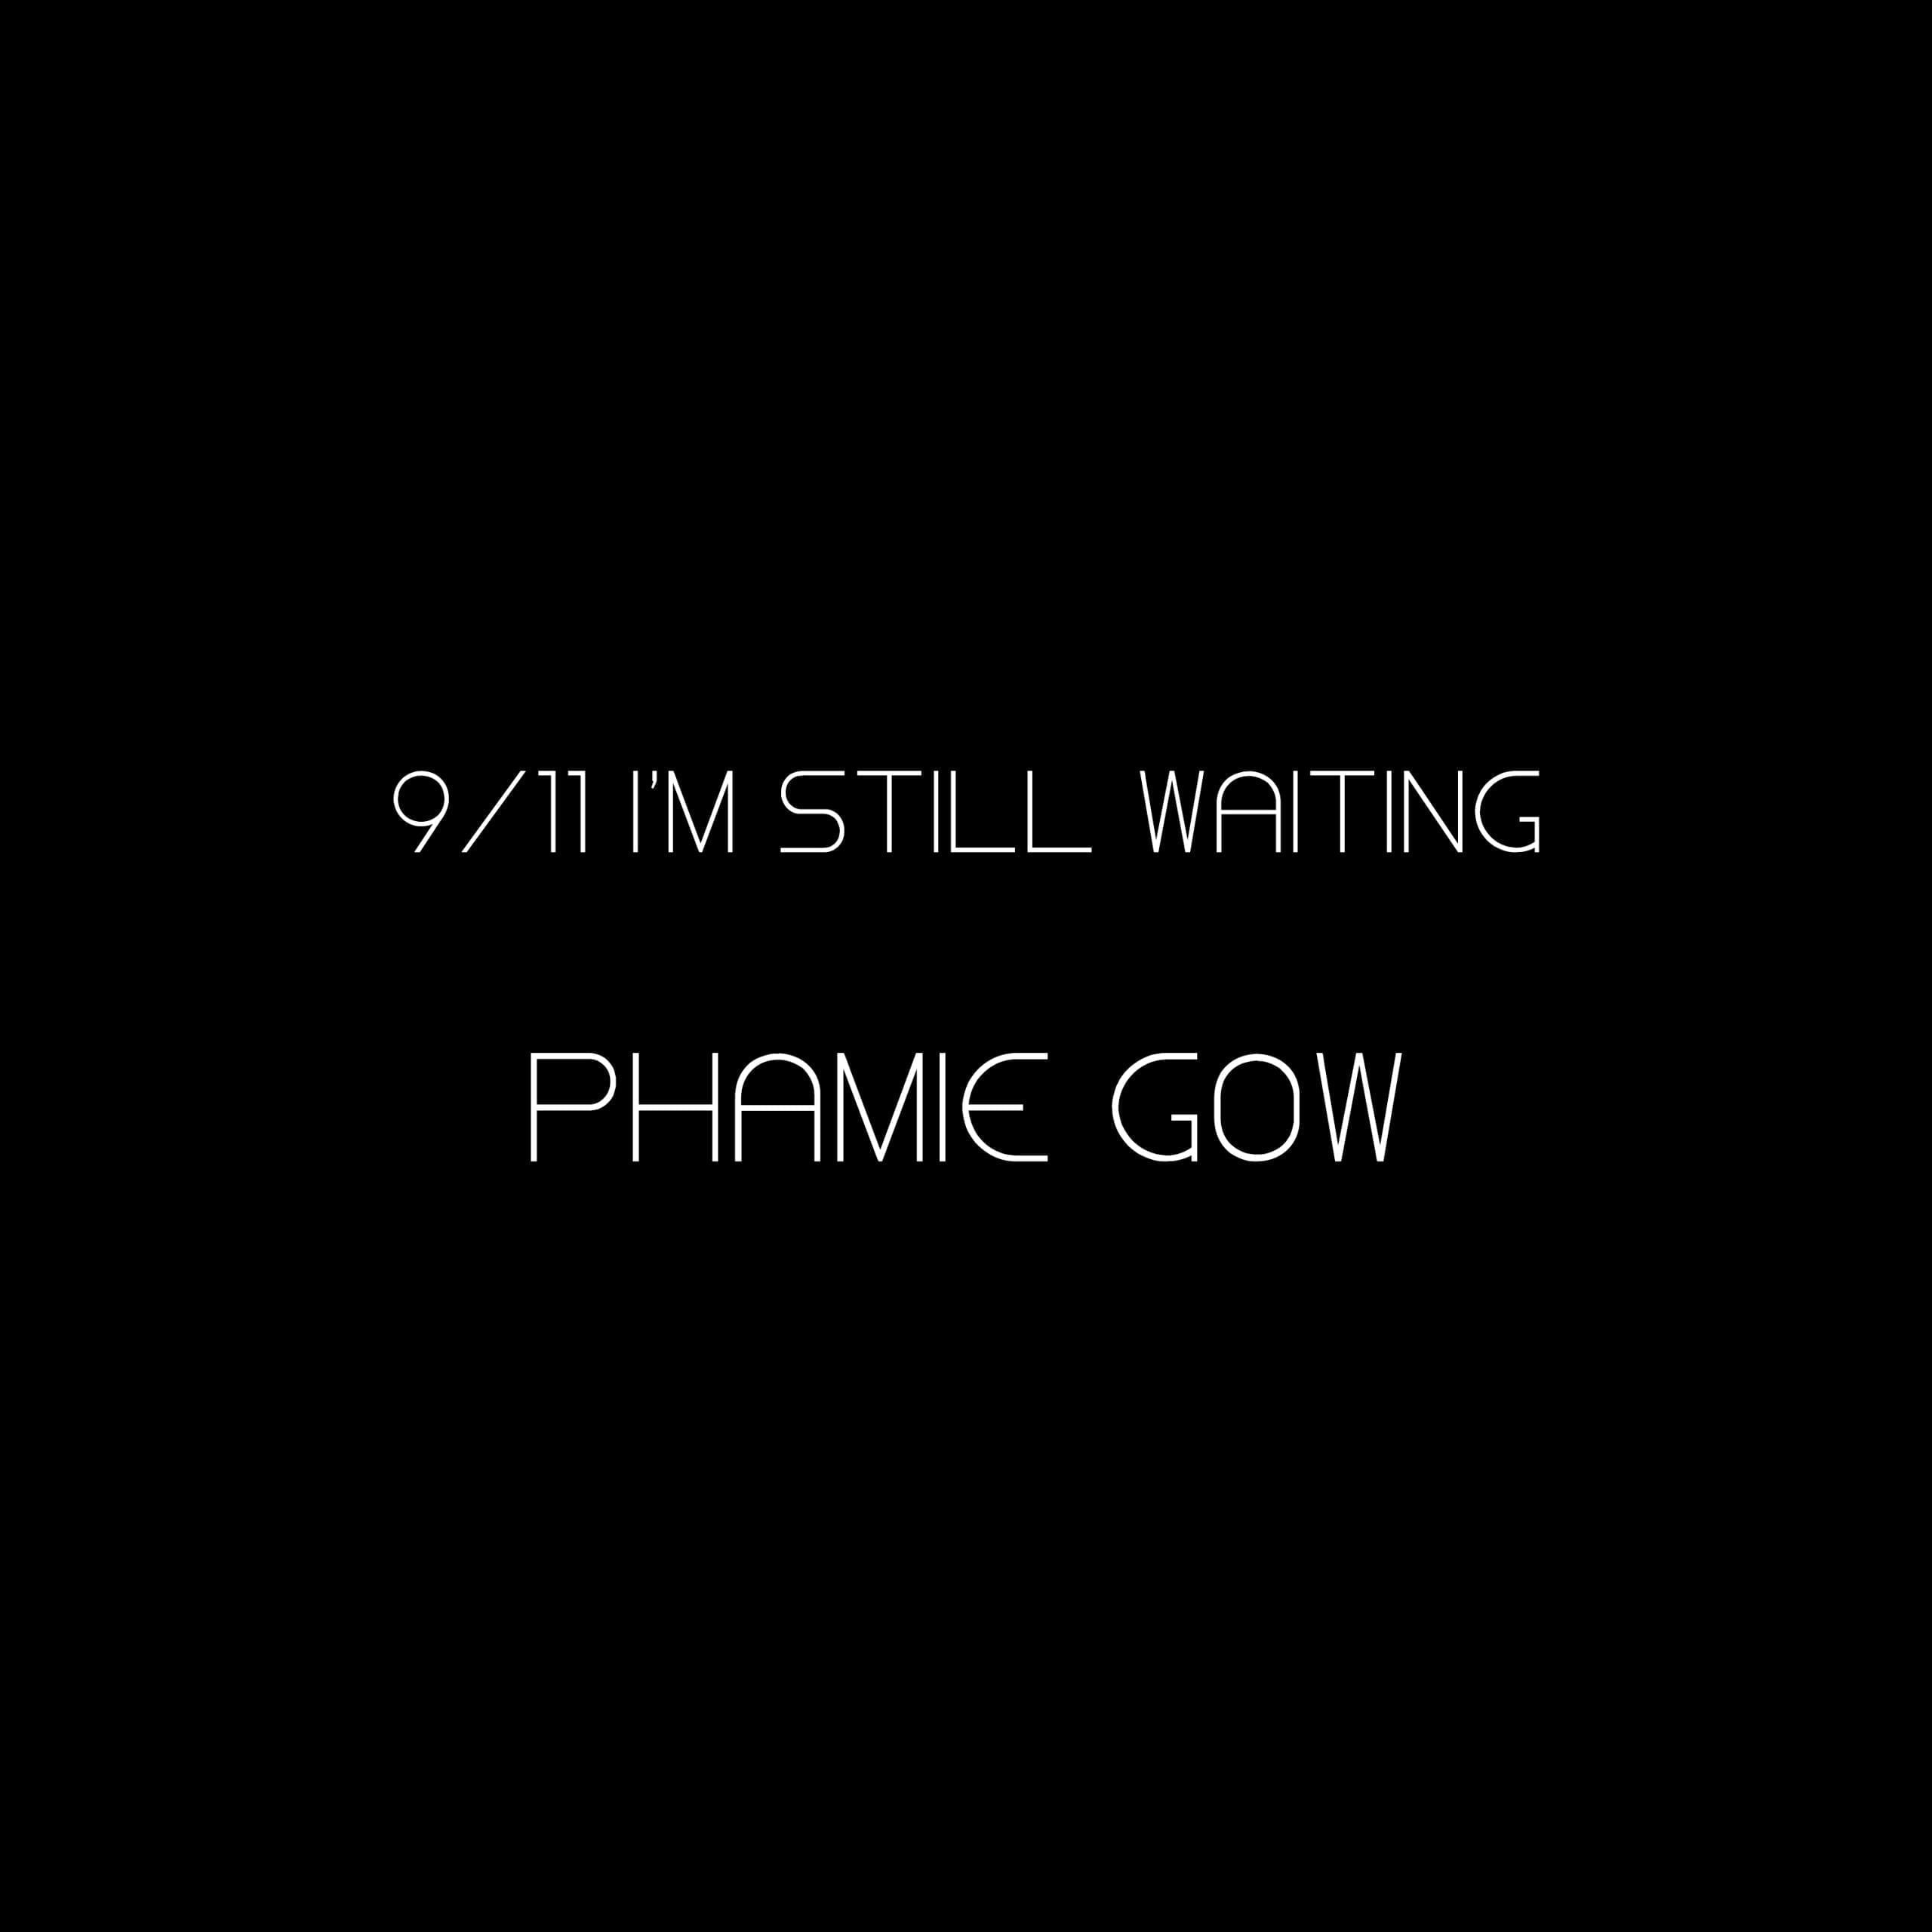 NEW single: ‘I’m Still Waiting’ in memory of 9/11